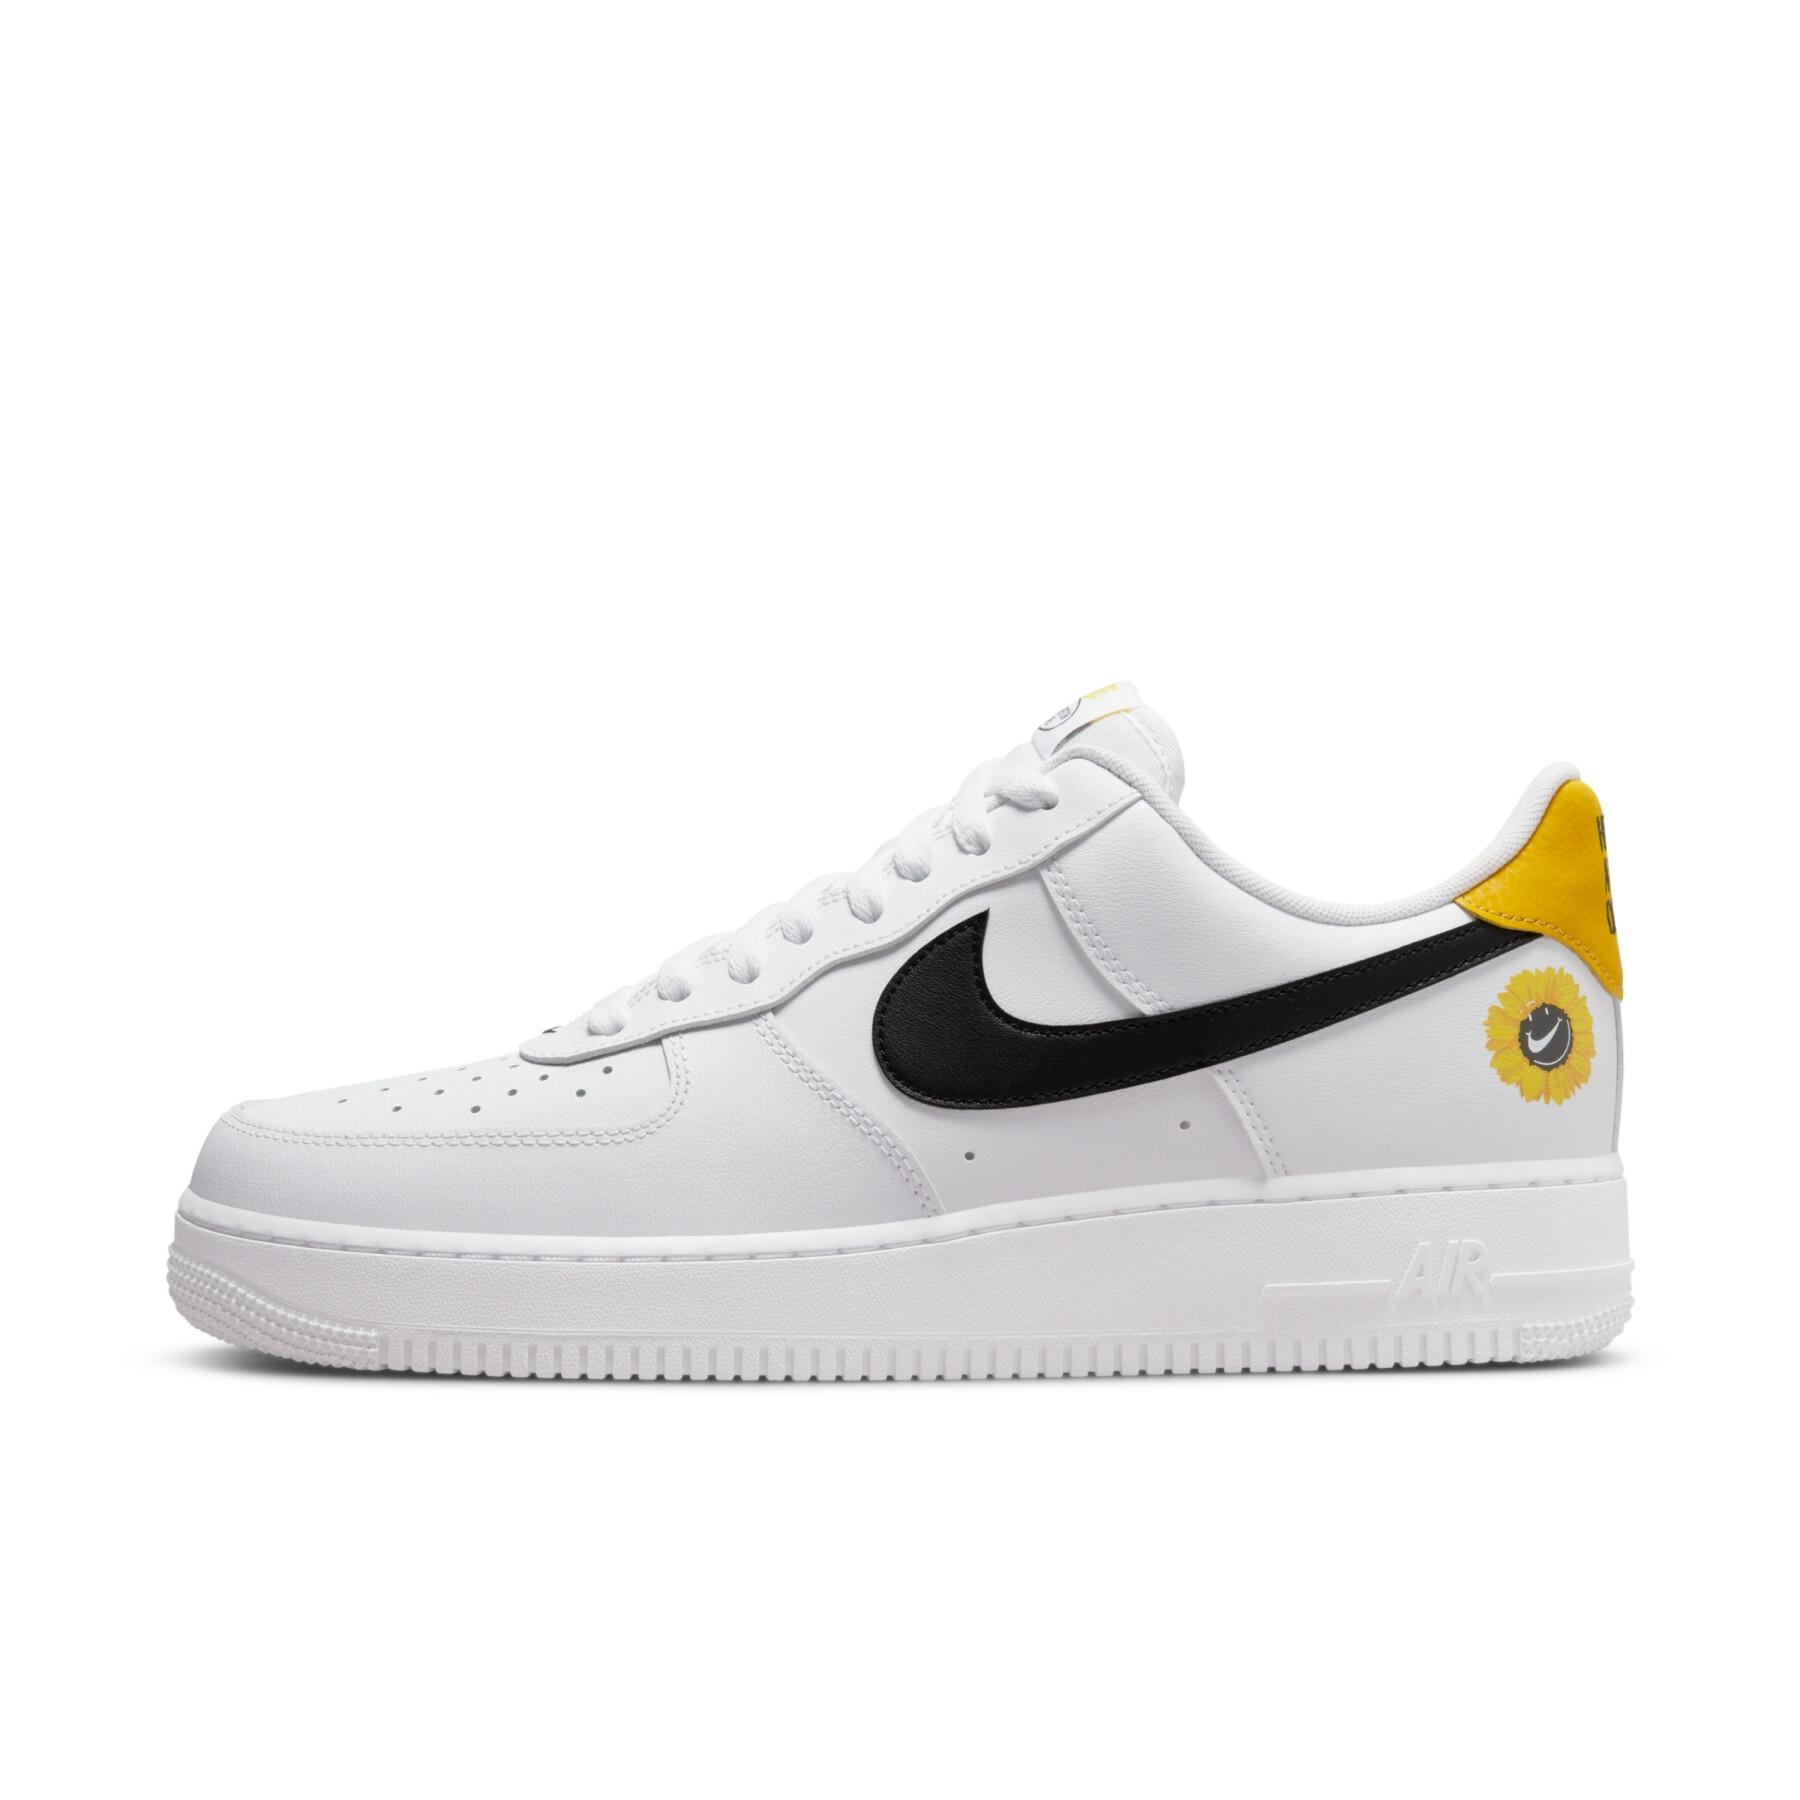 Formadores Nike Air Force 1 '07 Lv8